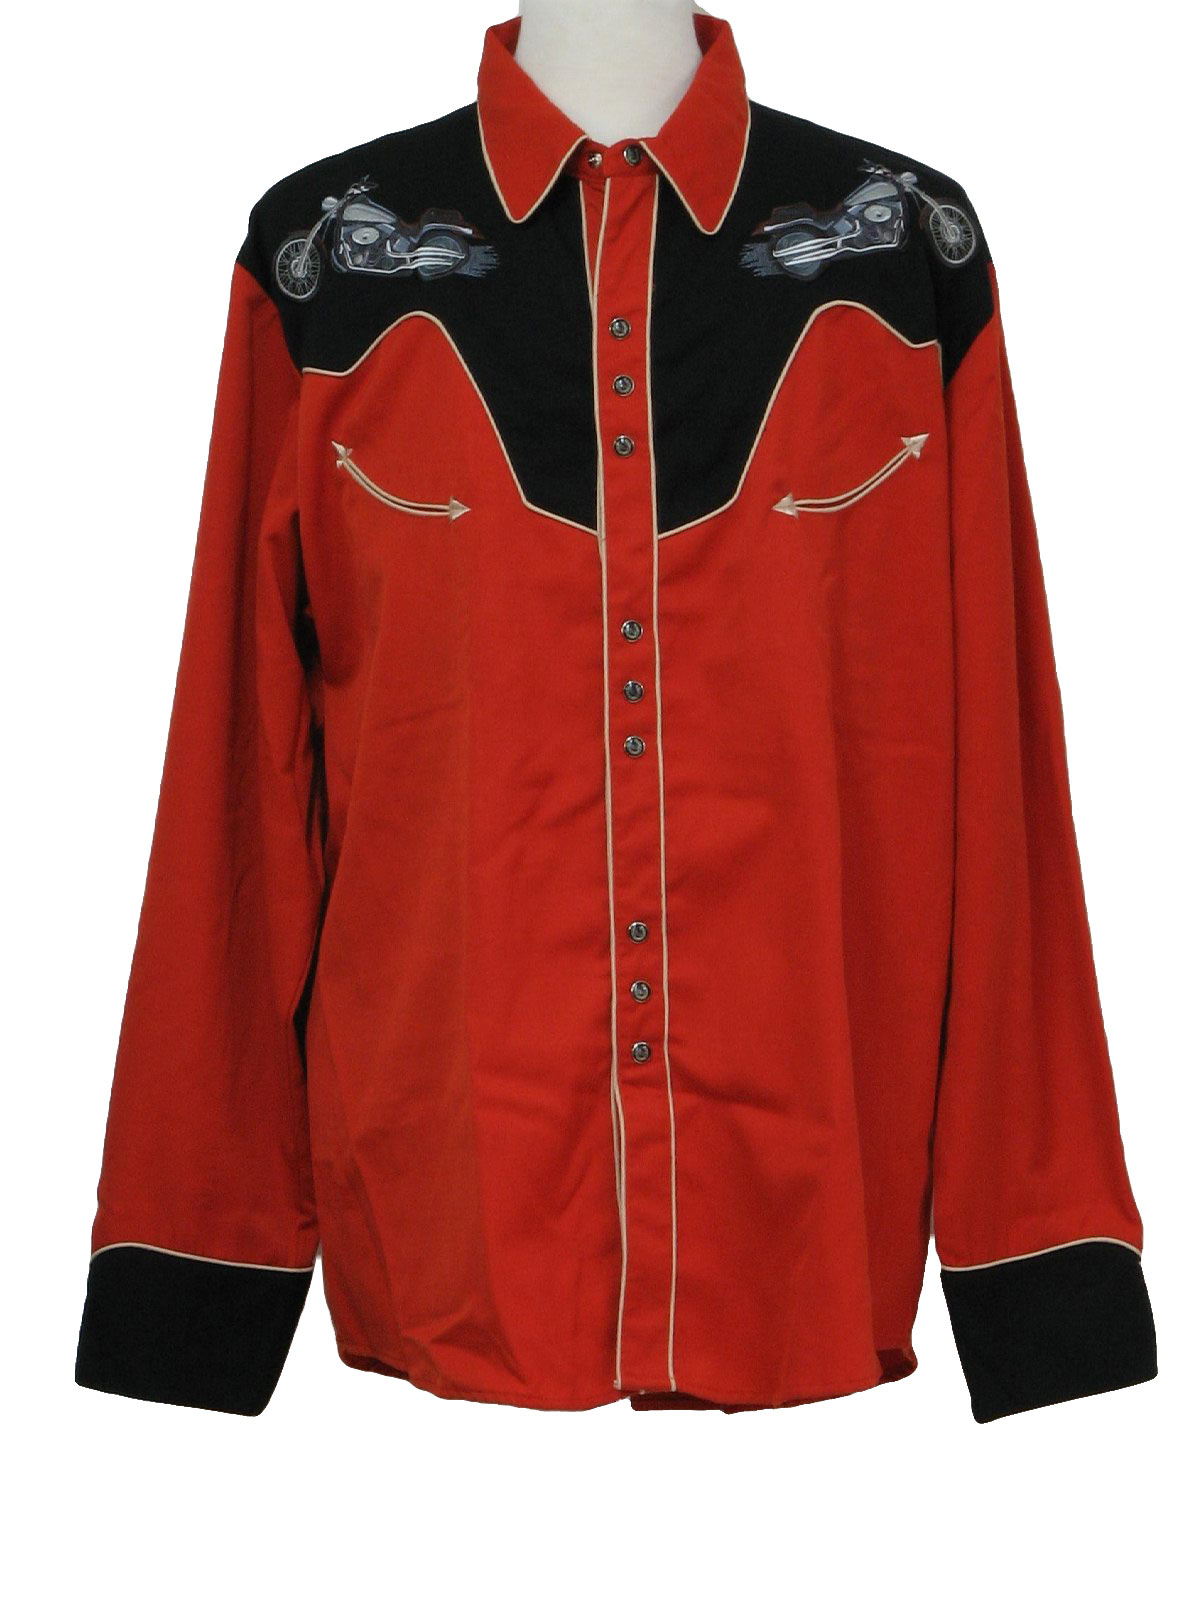 90s Vintage Scully Western Shirt: 90s -Scully- Mens orange, black ...